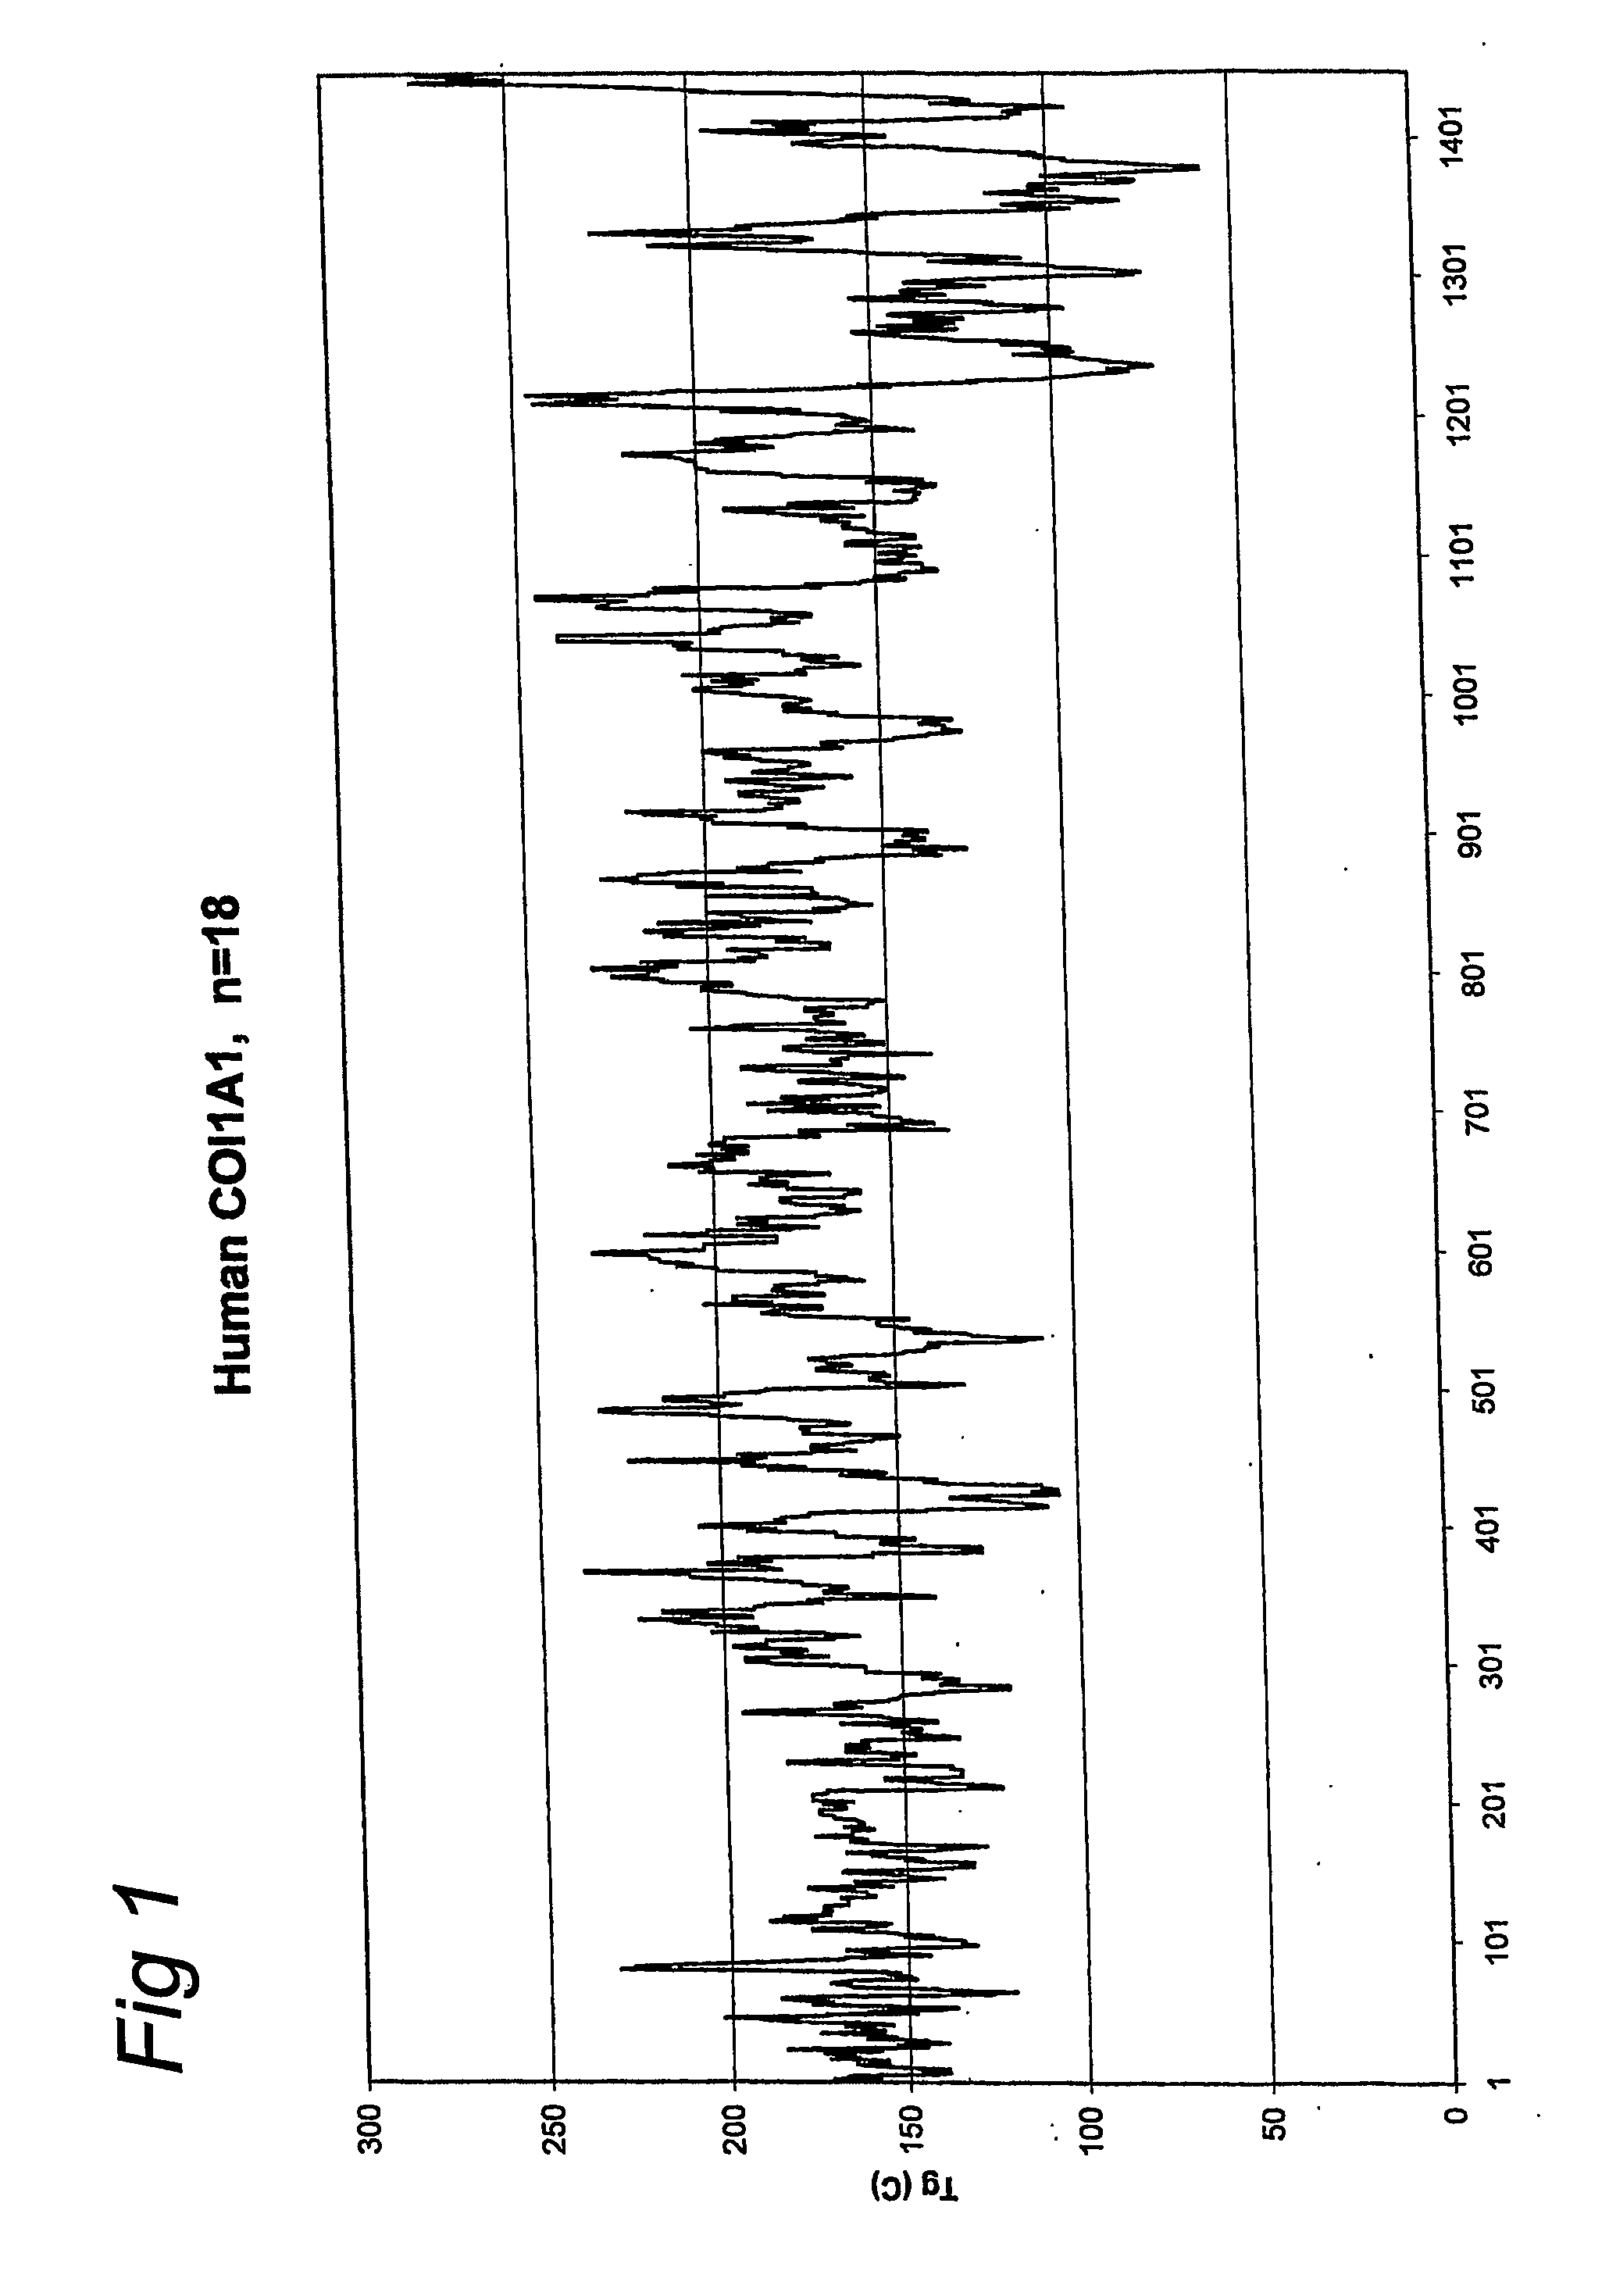 Use of recombinant or synthetic gelatin-like proteins as stabiliser in lyophilized pharmaceutical compositions